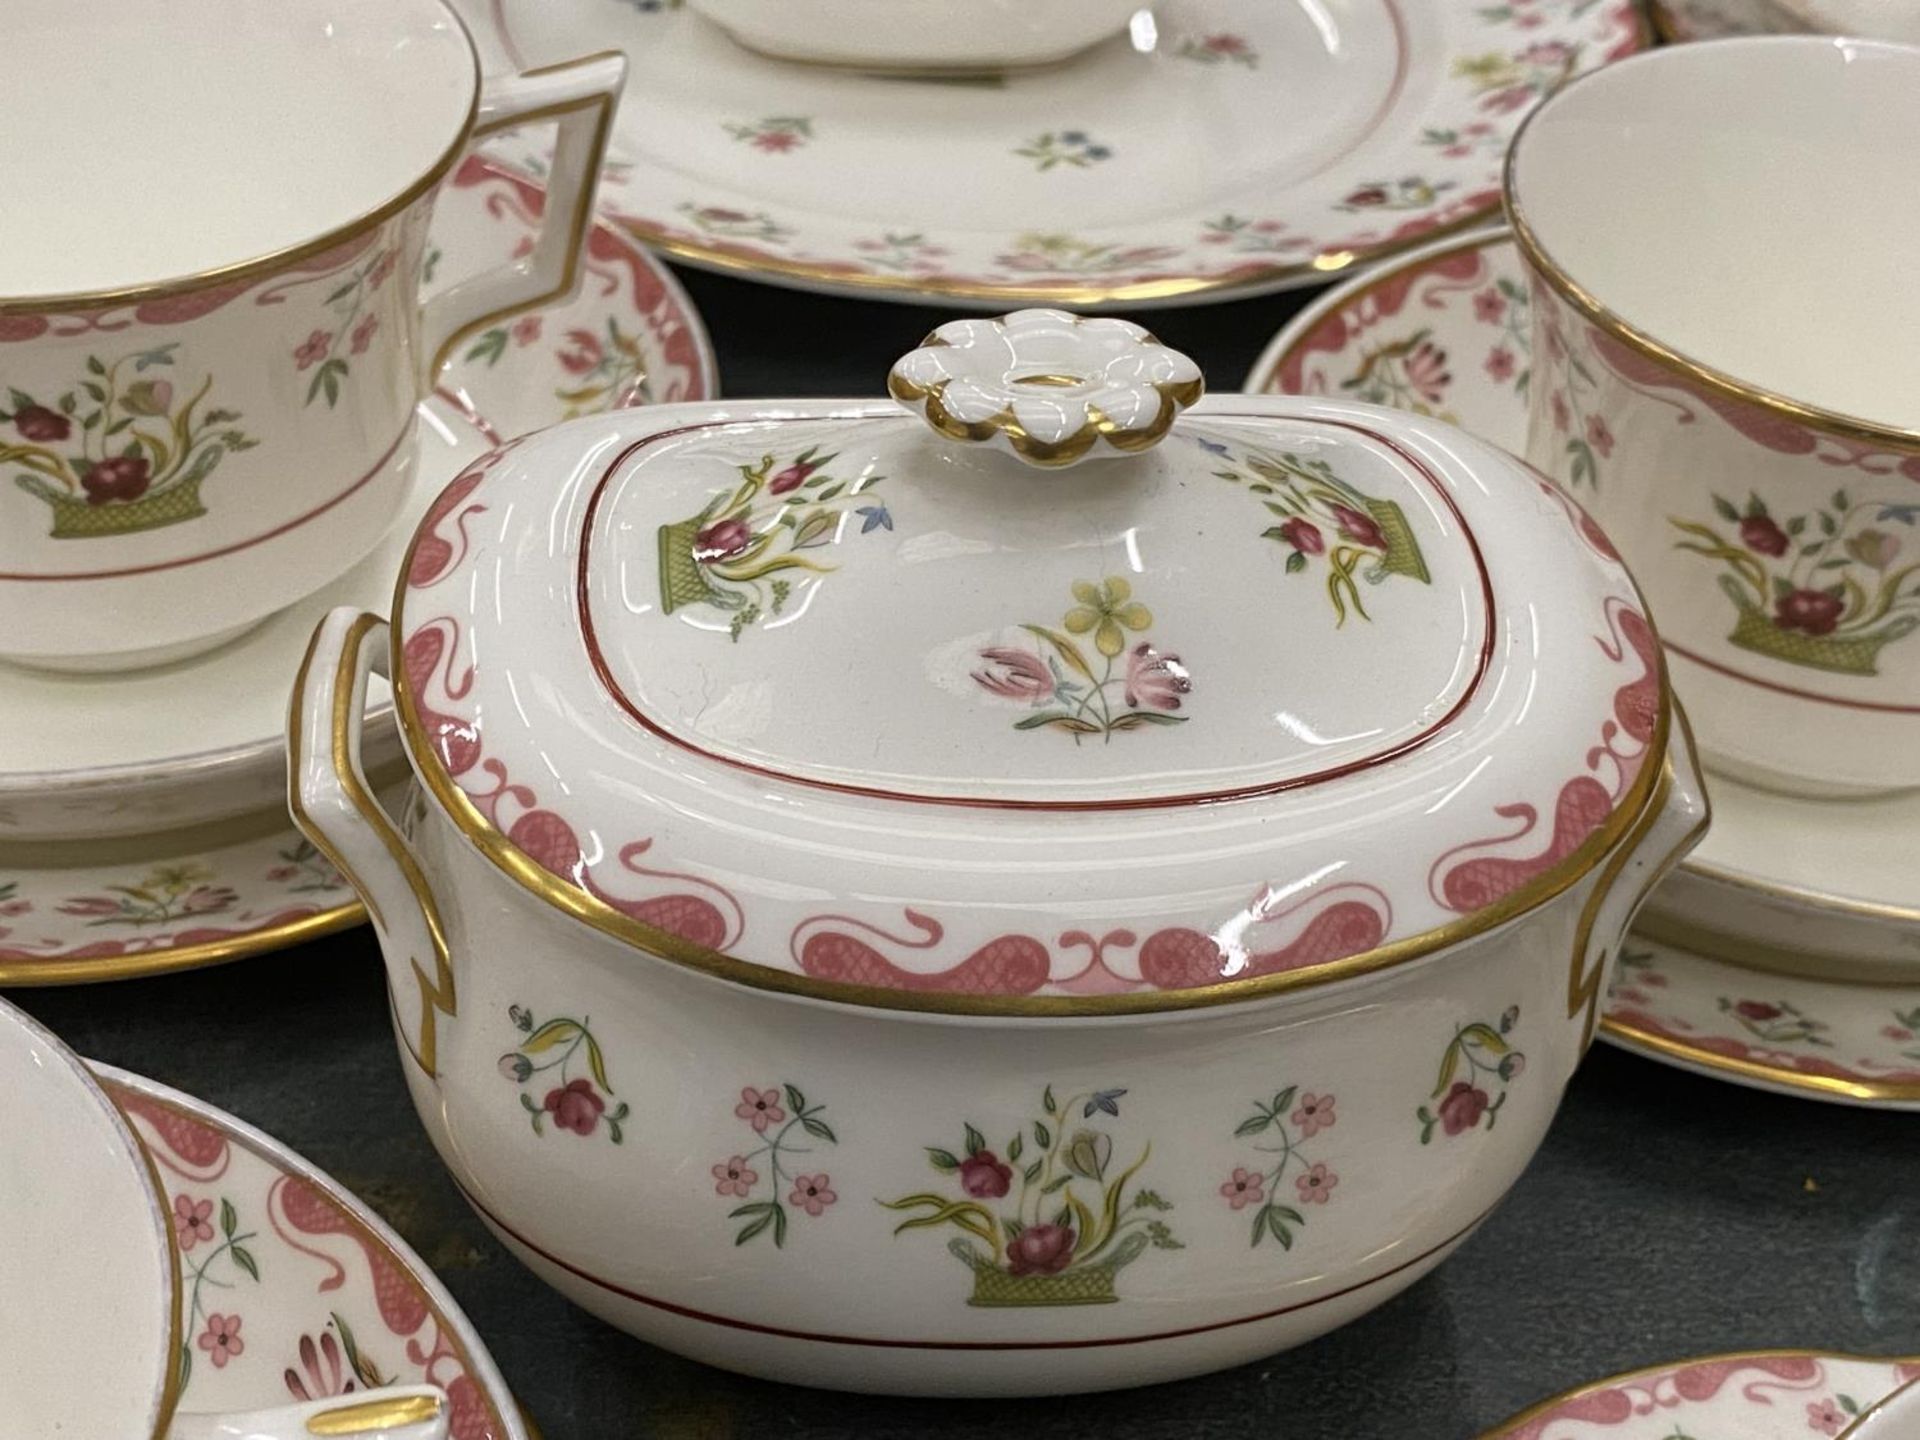 A WEDGWOOD 'BIANCA' PART TEASET TO INCLUDE A CAKE PLATE, SUGAR BOWL, CREAM JUG, CUPS, SAUCERS AND - Image 3 of 4